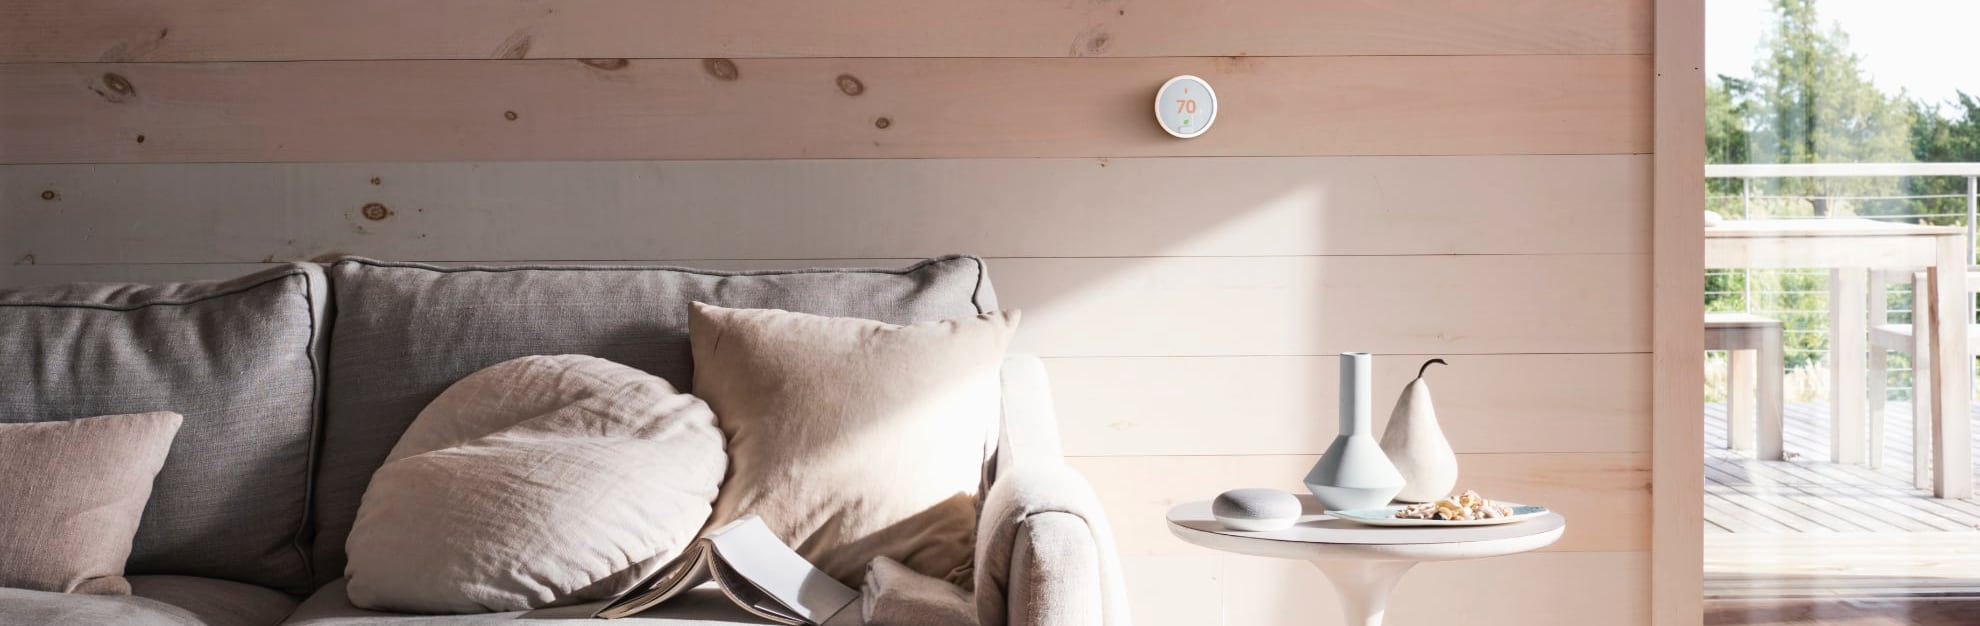 Vivint Home Automation in Eugene